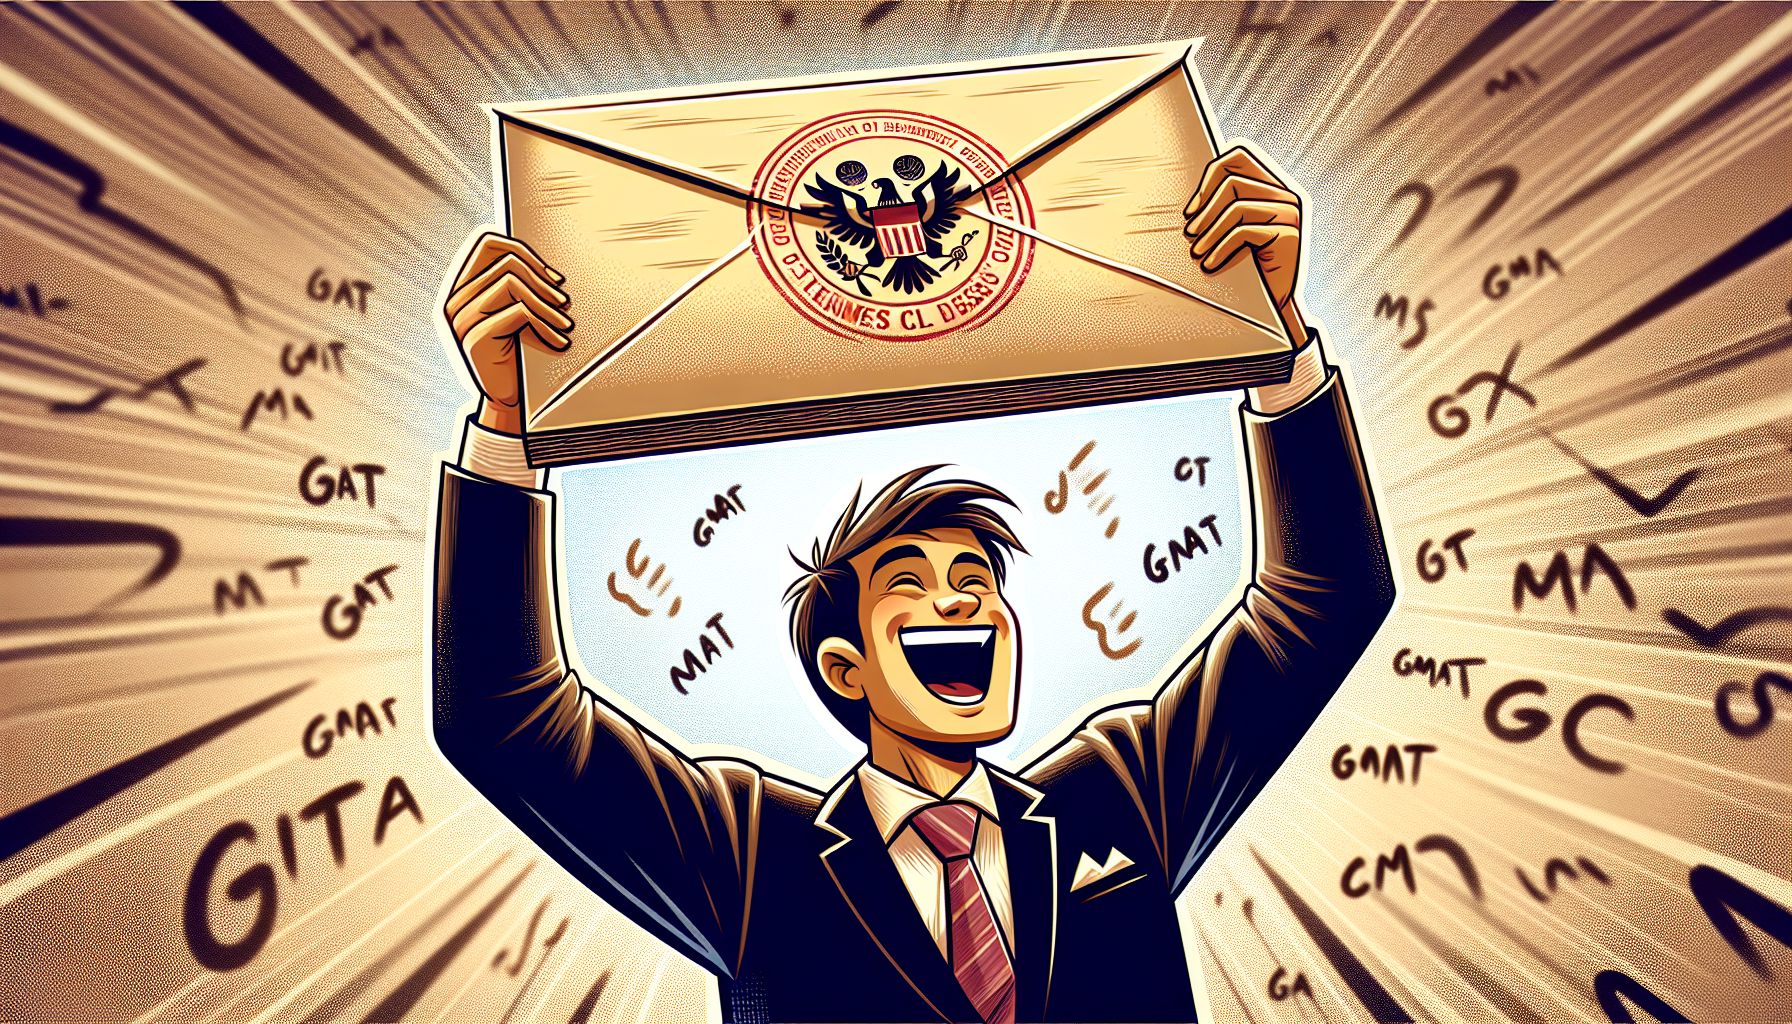 Cartoon of a person receiving an acceptance letter from a business school